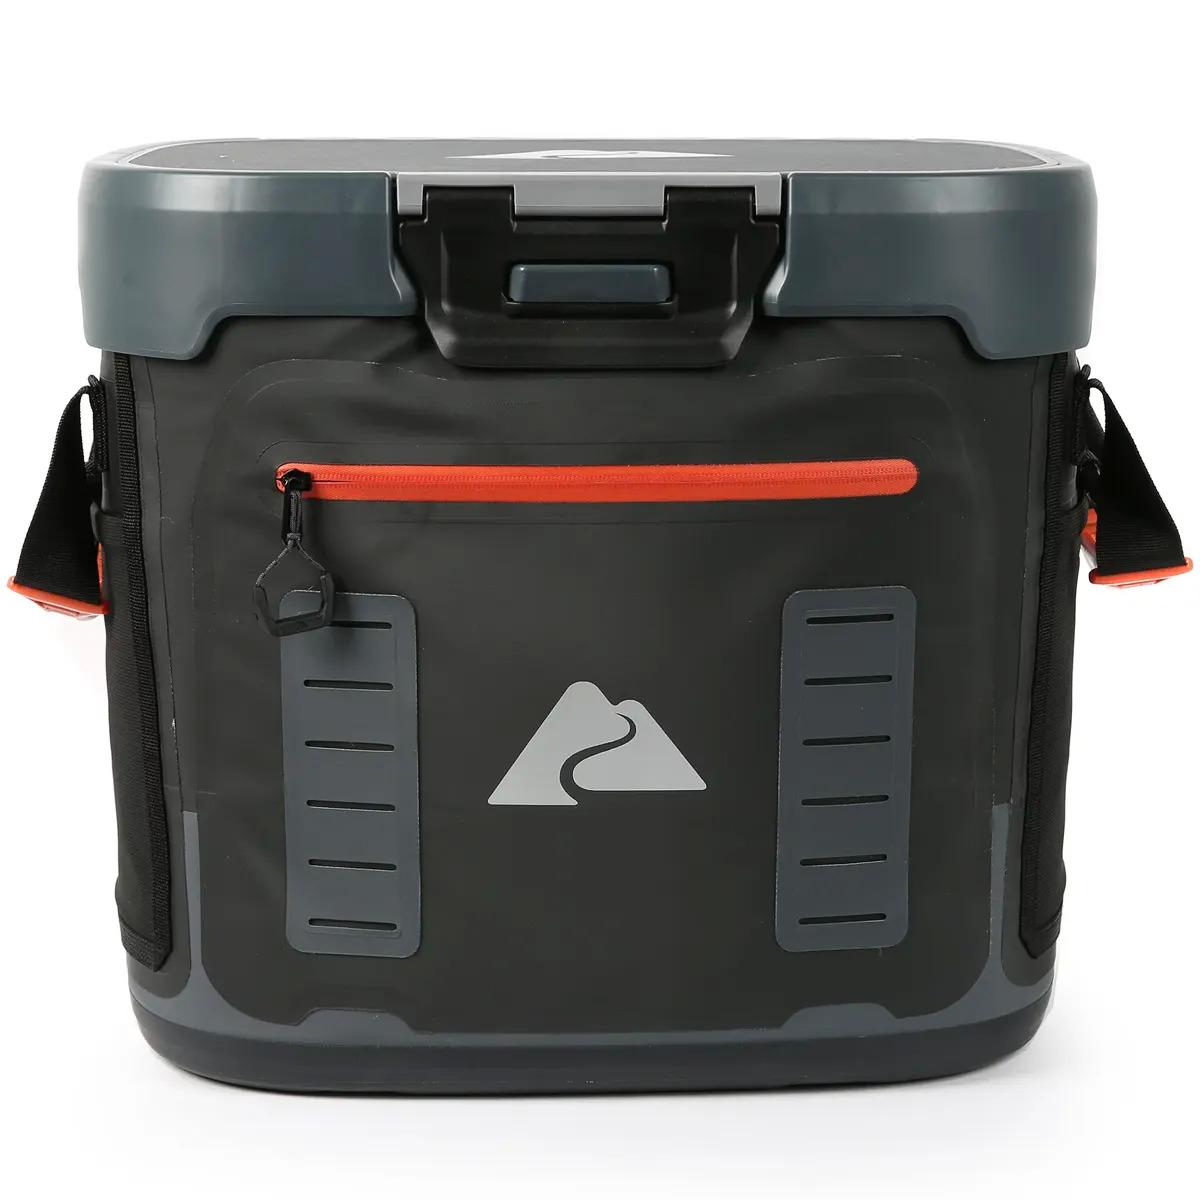 36-Can Ozark Trail Welded Hard Sided Cooler for $52 Shipped